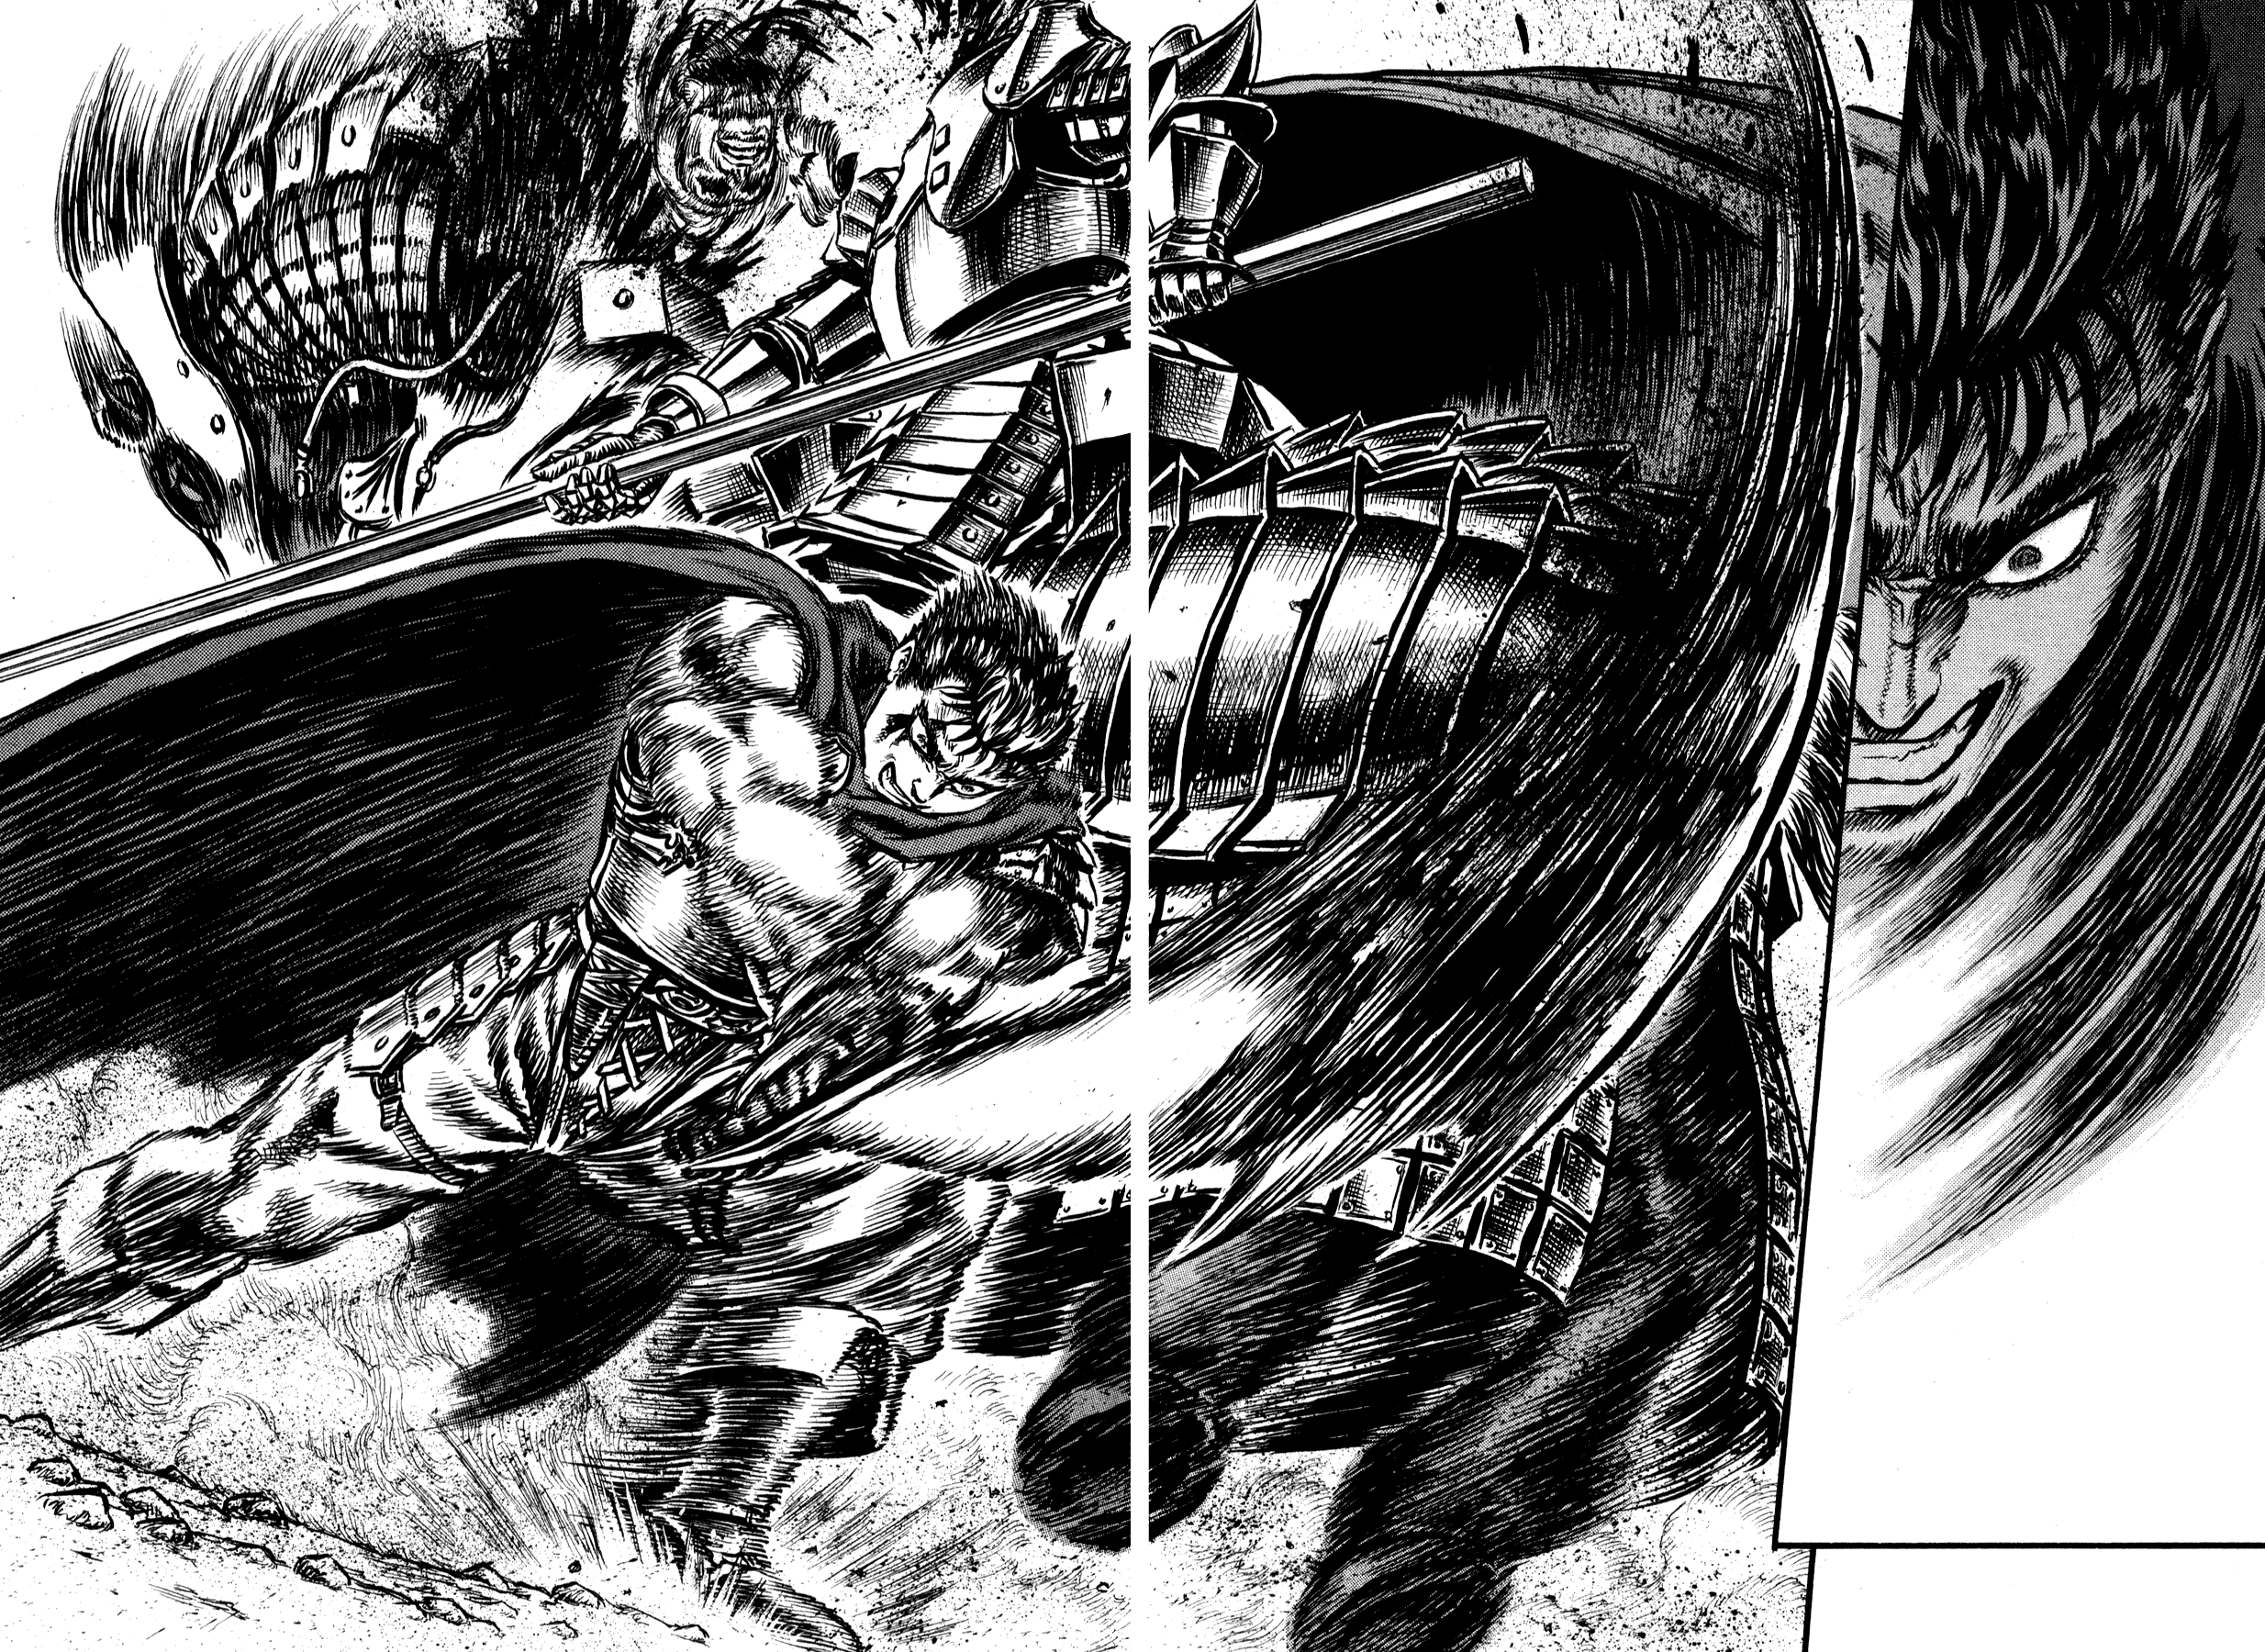 Guts doesn't protect victims of violence” – or does he?! – Berserk